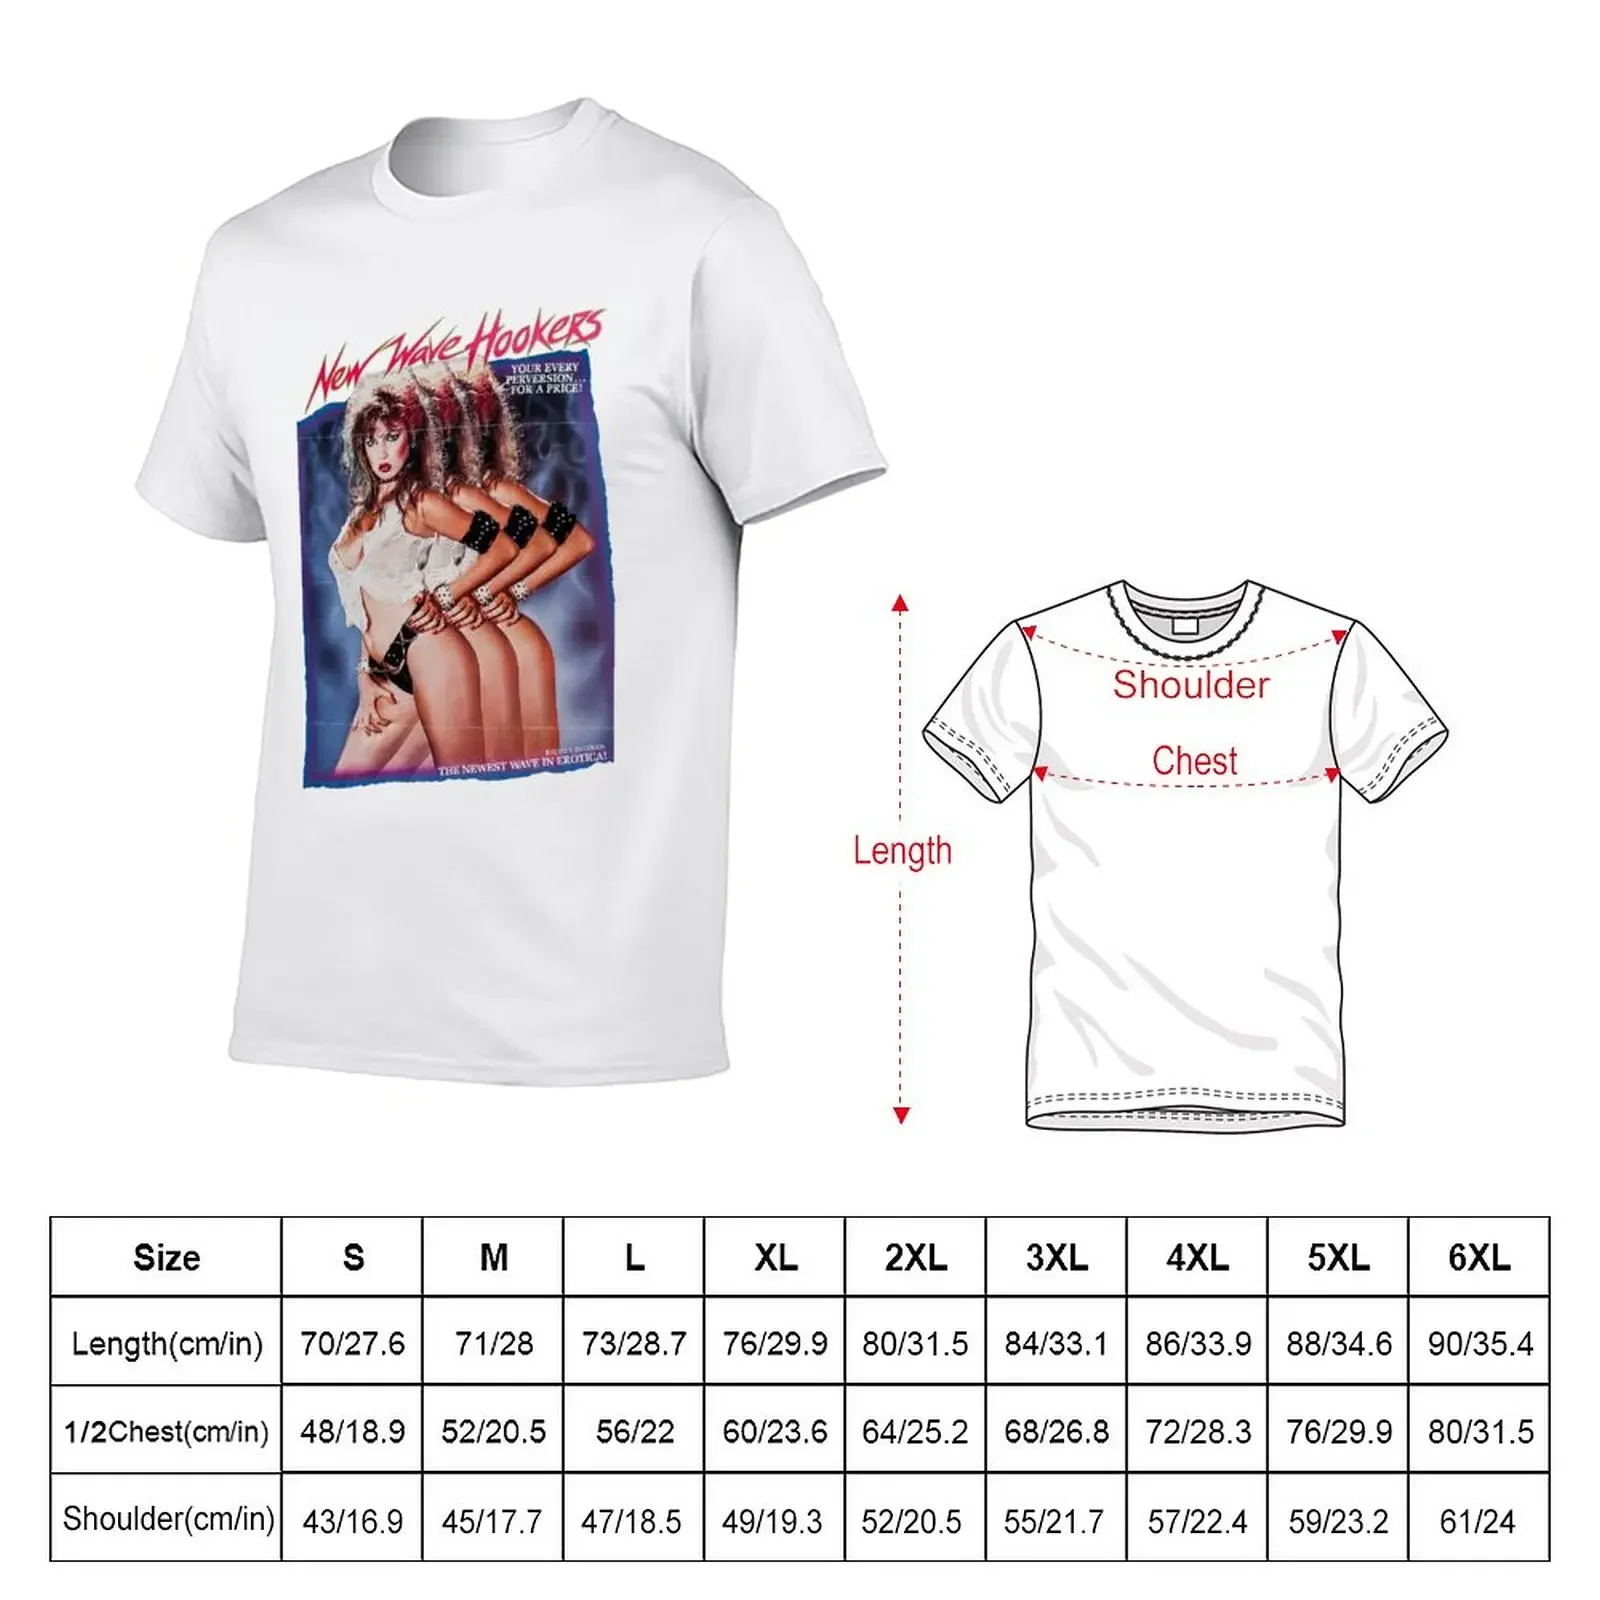 New Wave Hookers (1985) T-Shirt hippie clothes quick drying mens t shirts casual stylish